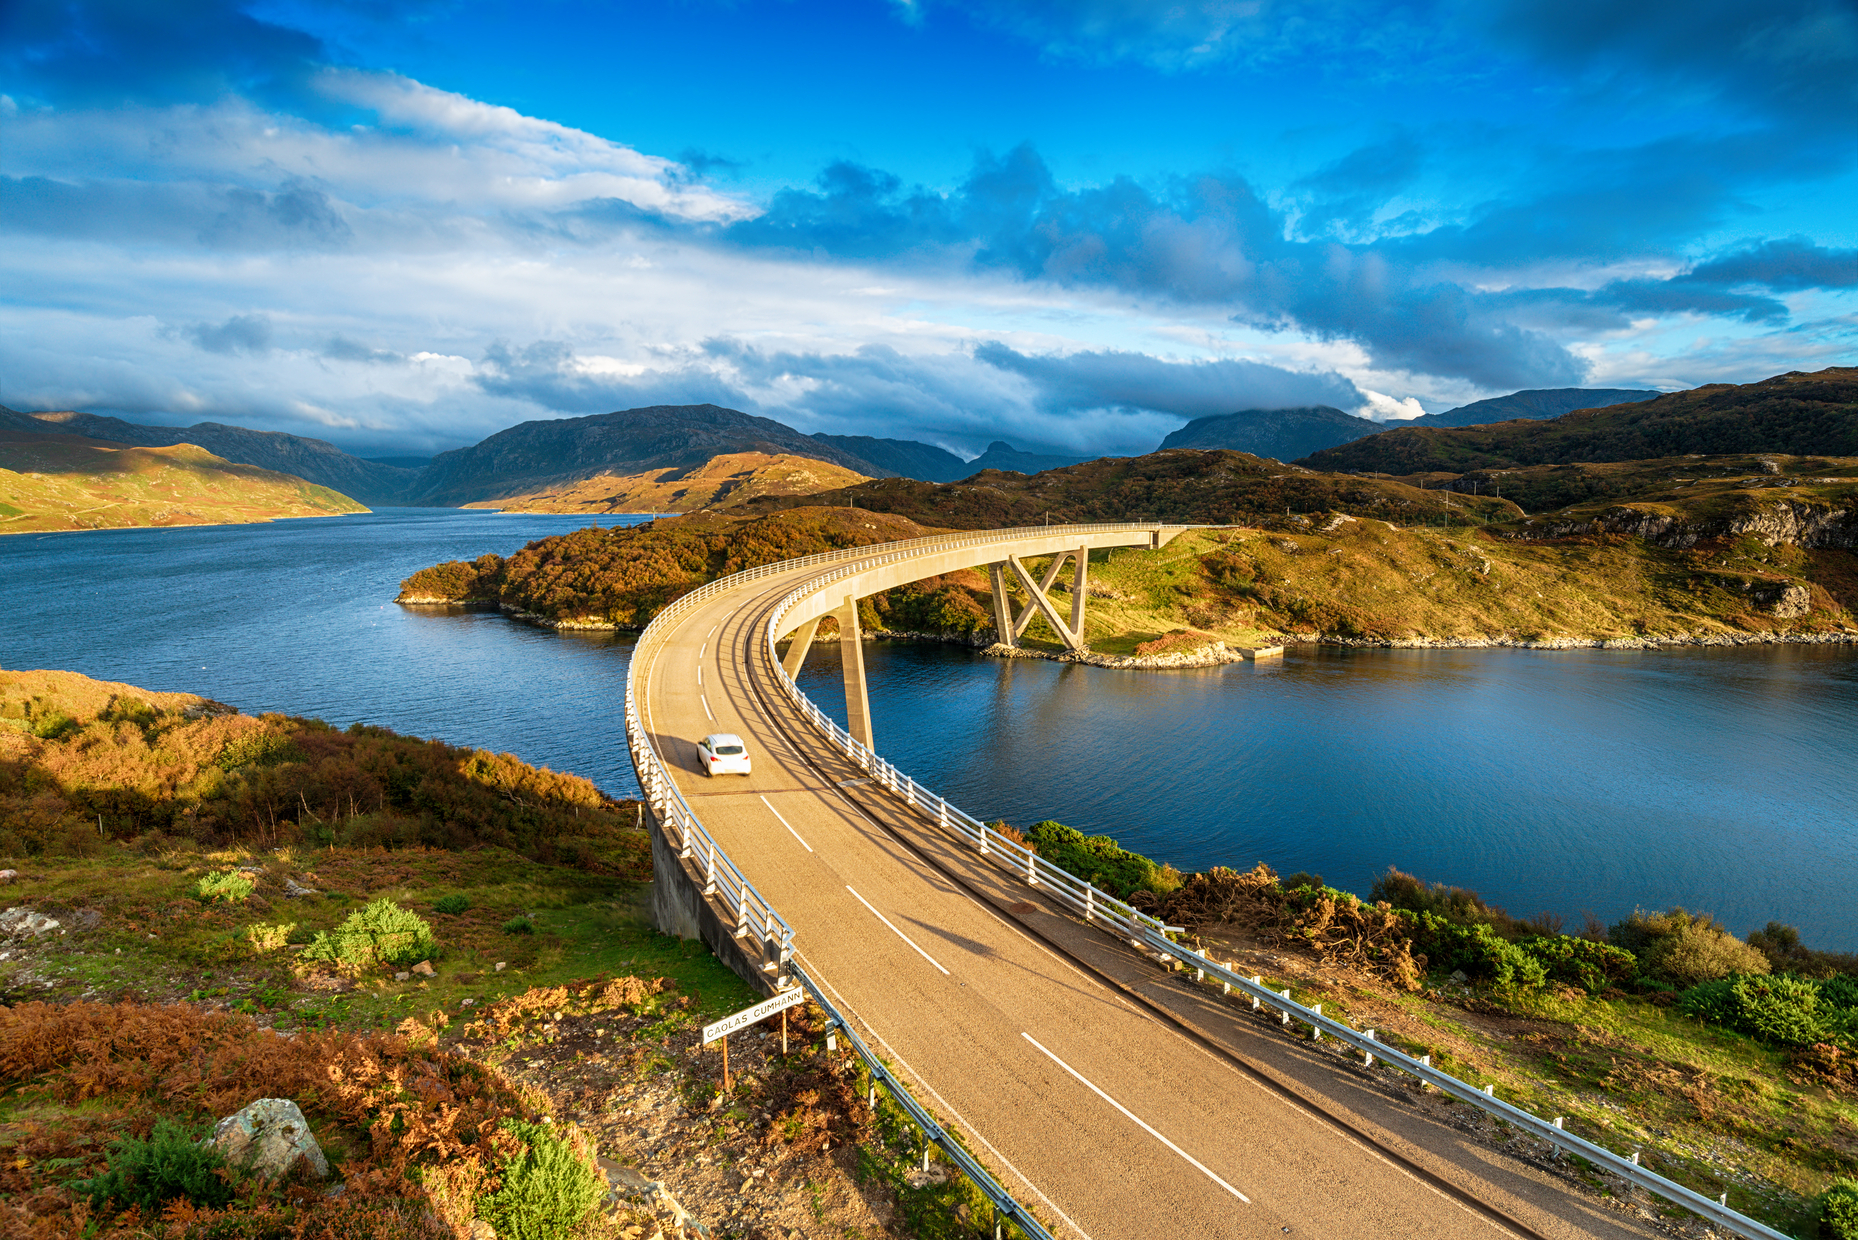 A destination par excellence for a Scottish road trip, the <a href="https://www.northcoast500.com/" rel="noreferrer noopener">North Coast</a> travels through the Highlands for over 800 kilometres (500 miles). Discover incomparable landscapes and enjoy many outdoor activities along the way. We recommend spreading your getaway over five to seven days. Take this extraordinary route to quaint fishing villages, pristine beaches, and stunning mountains in six Scottish regions.